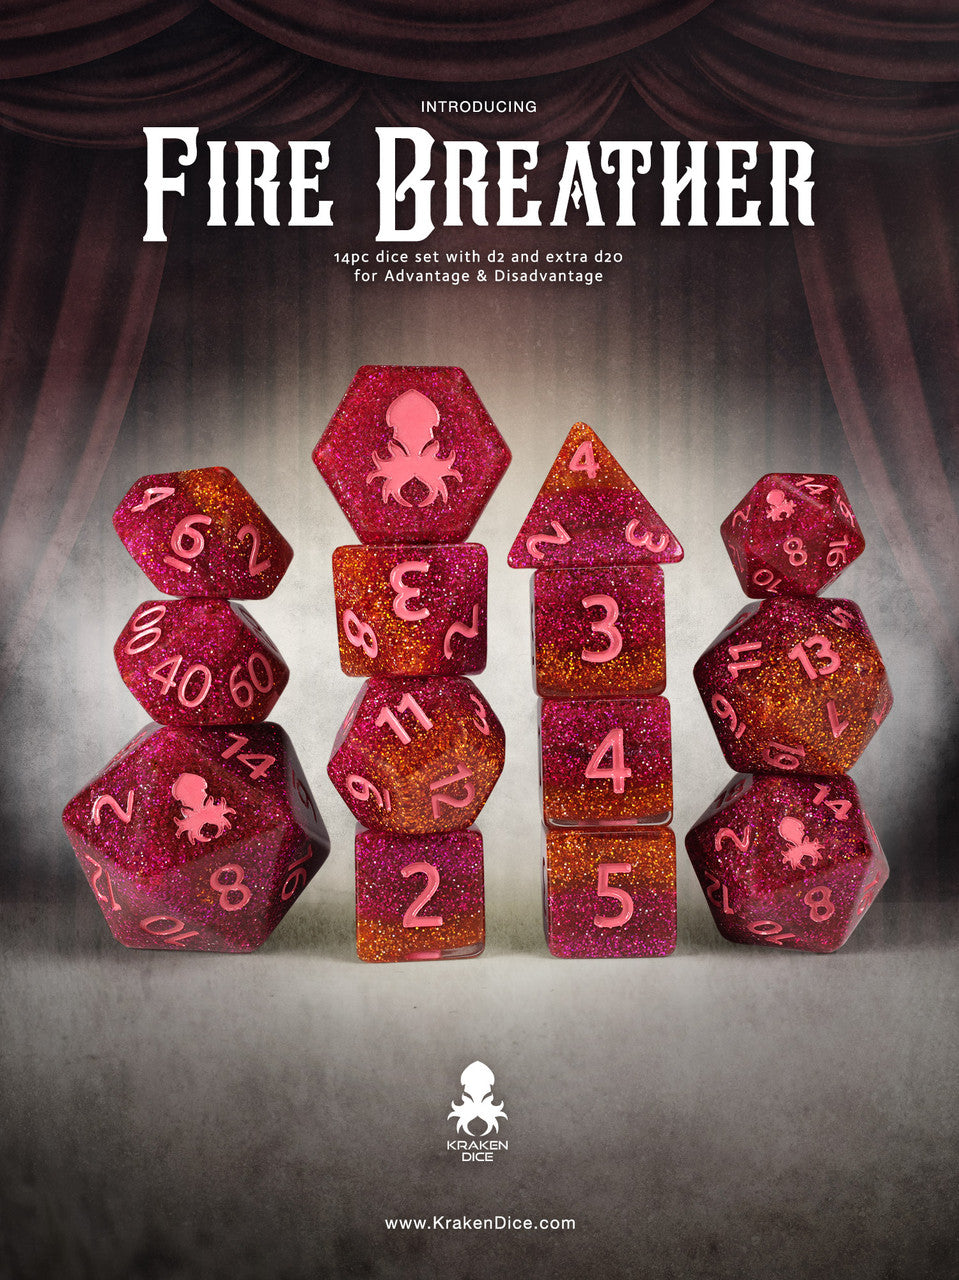 Fire Breather 14pc Dice Set Inked in Red